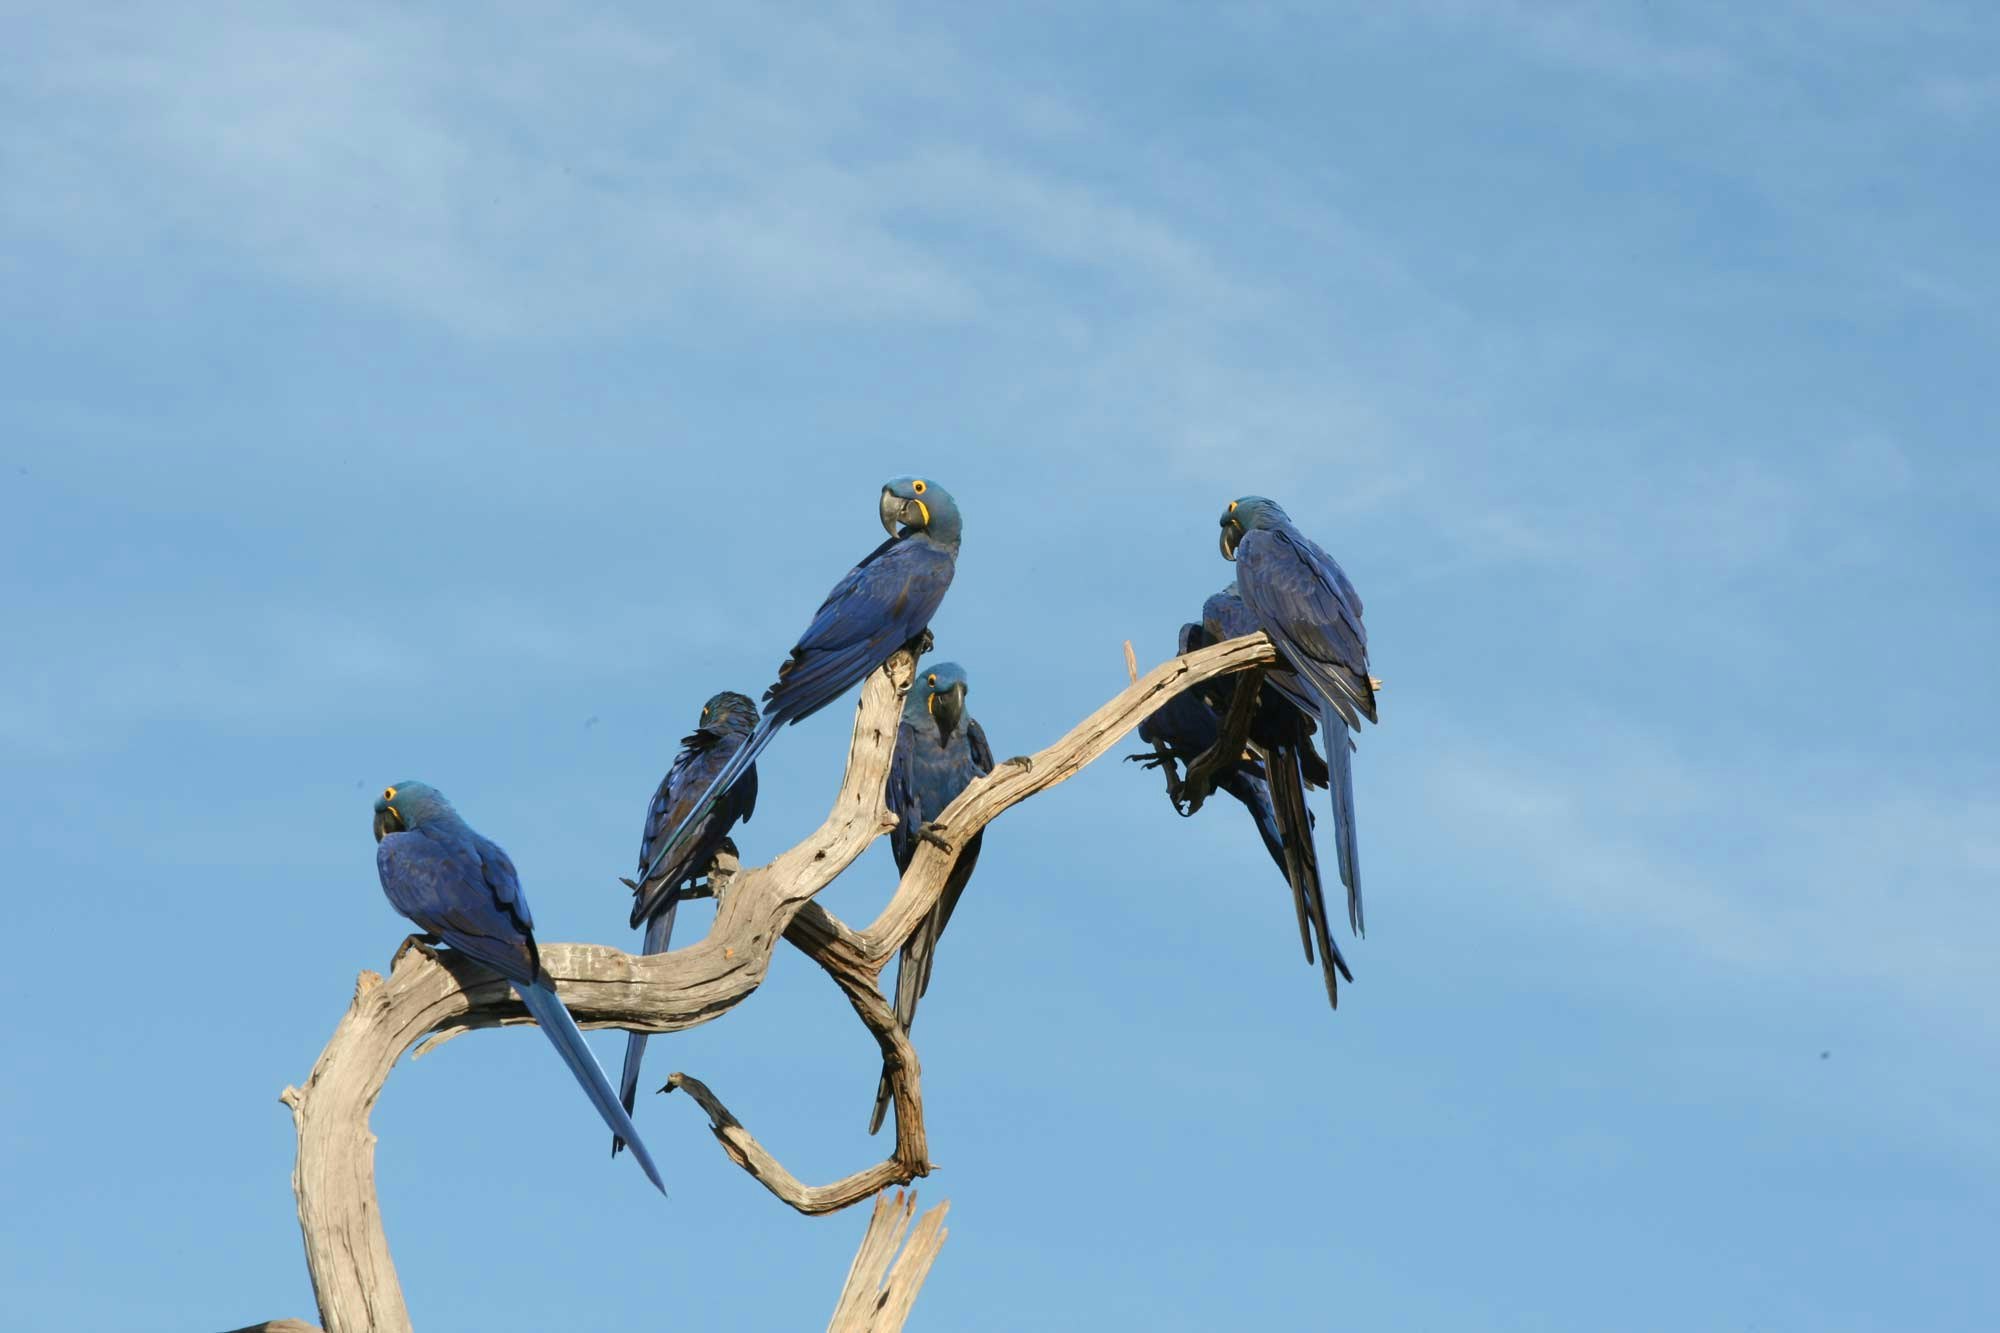 Macaw in a group on a branch